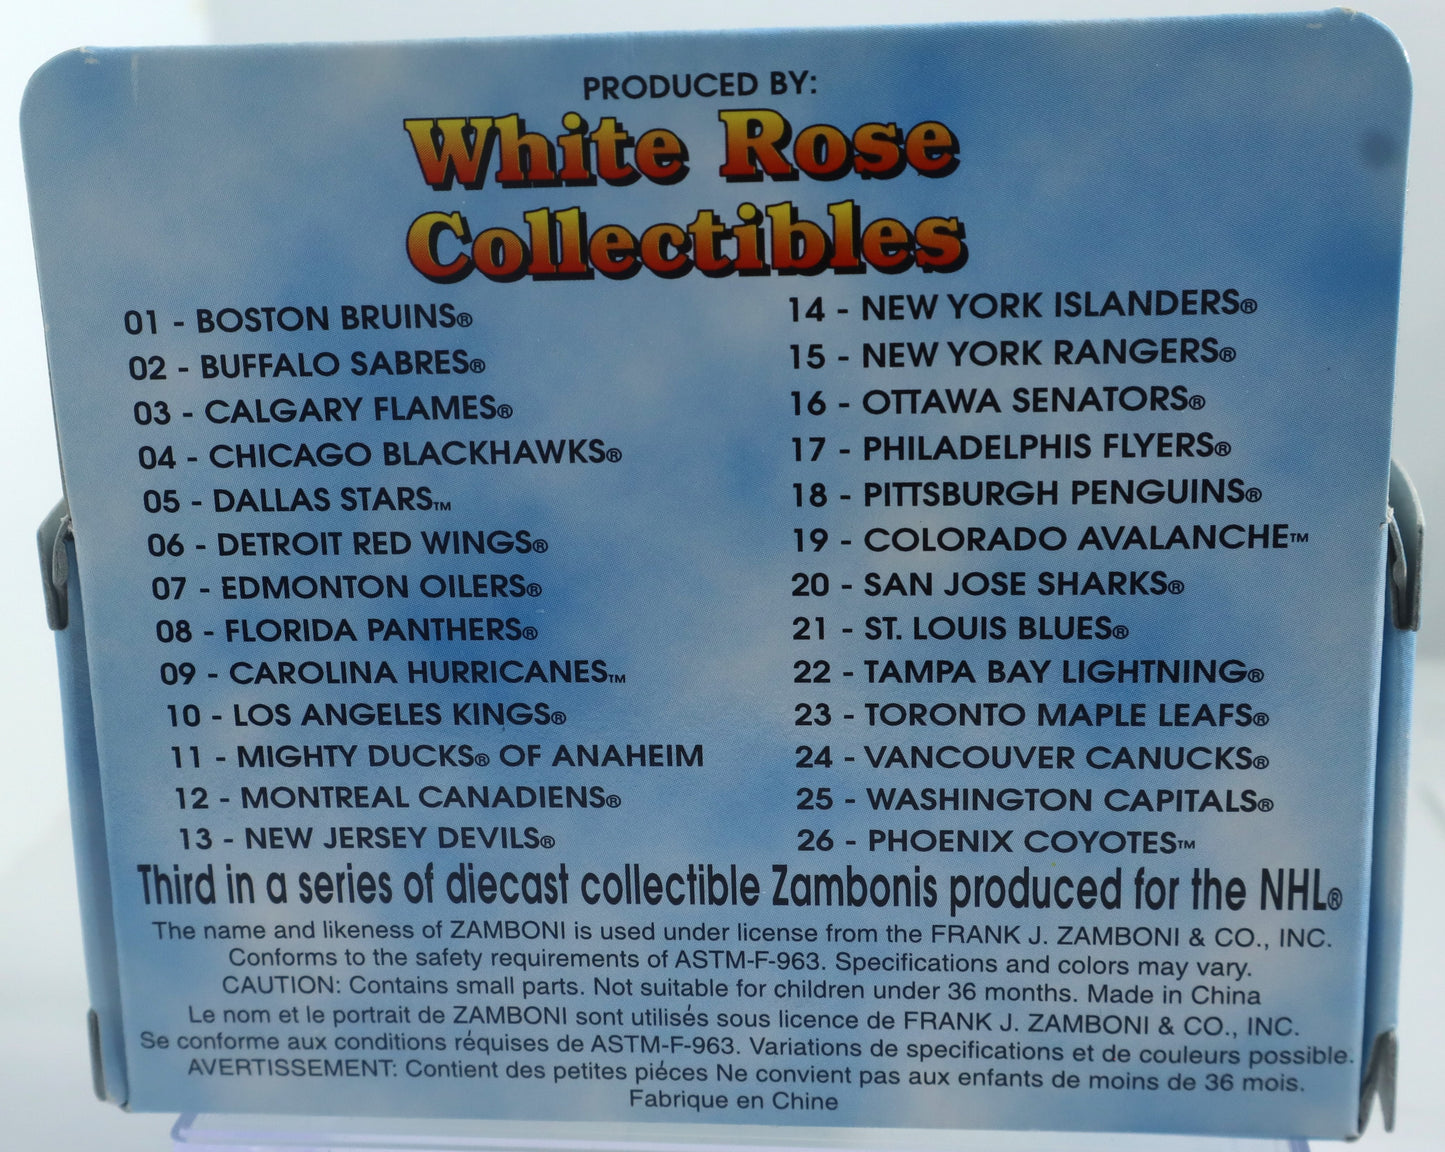 Zamboni White Rose Collectibles 1:50 scale diecast Florida Panthers